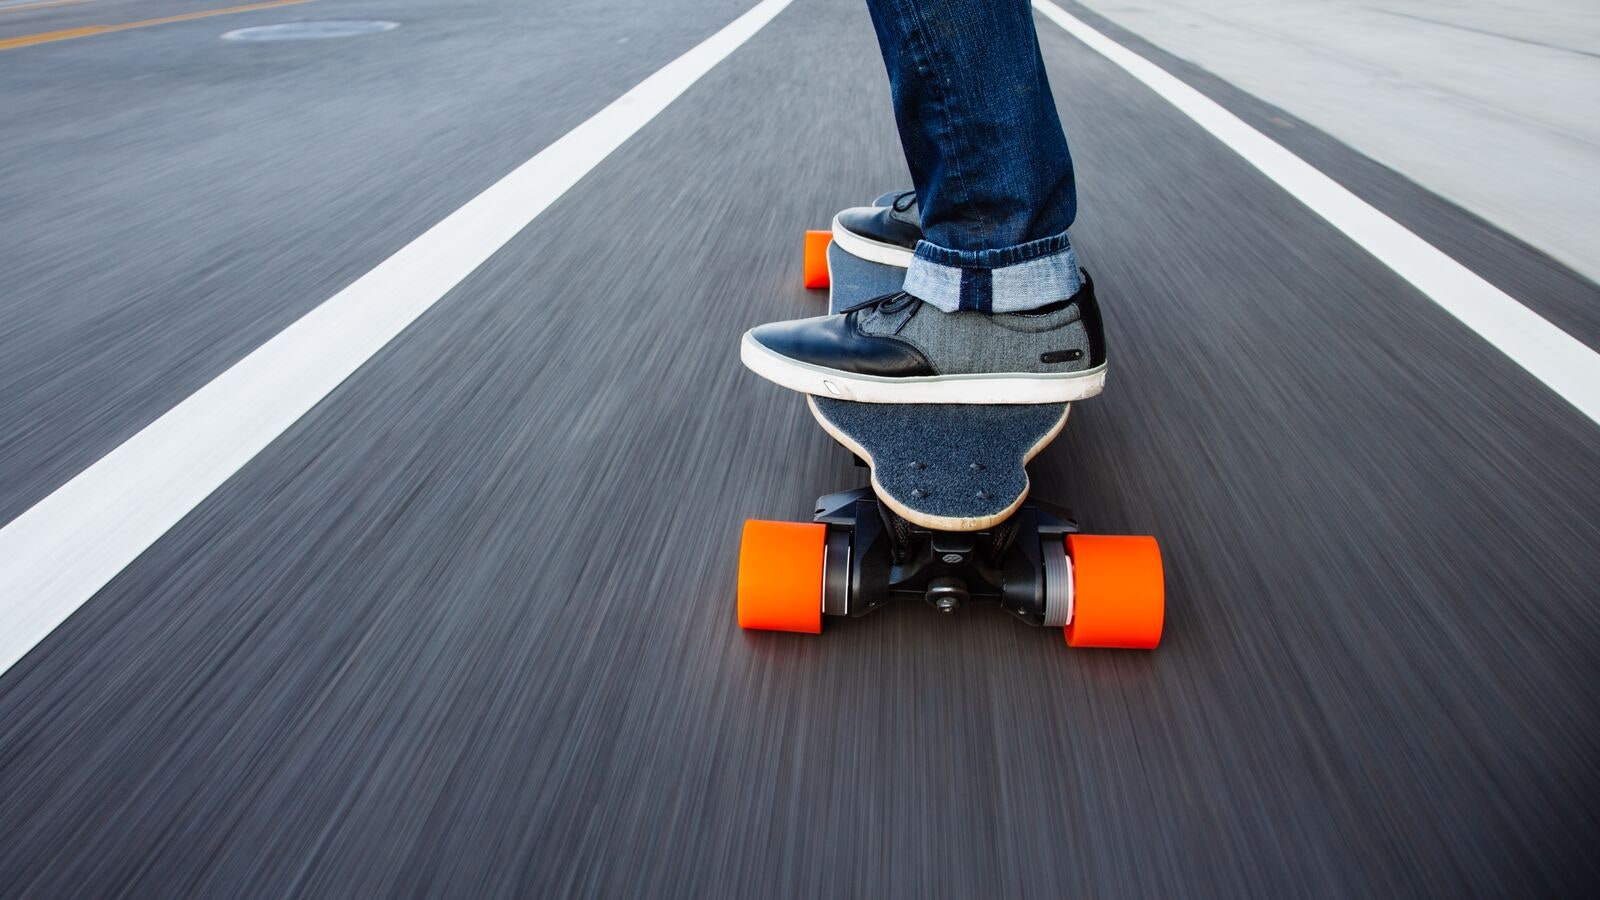 Hackers Can Seize Control Of Electric Skateboards And Toss Riders